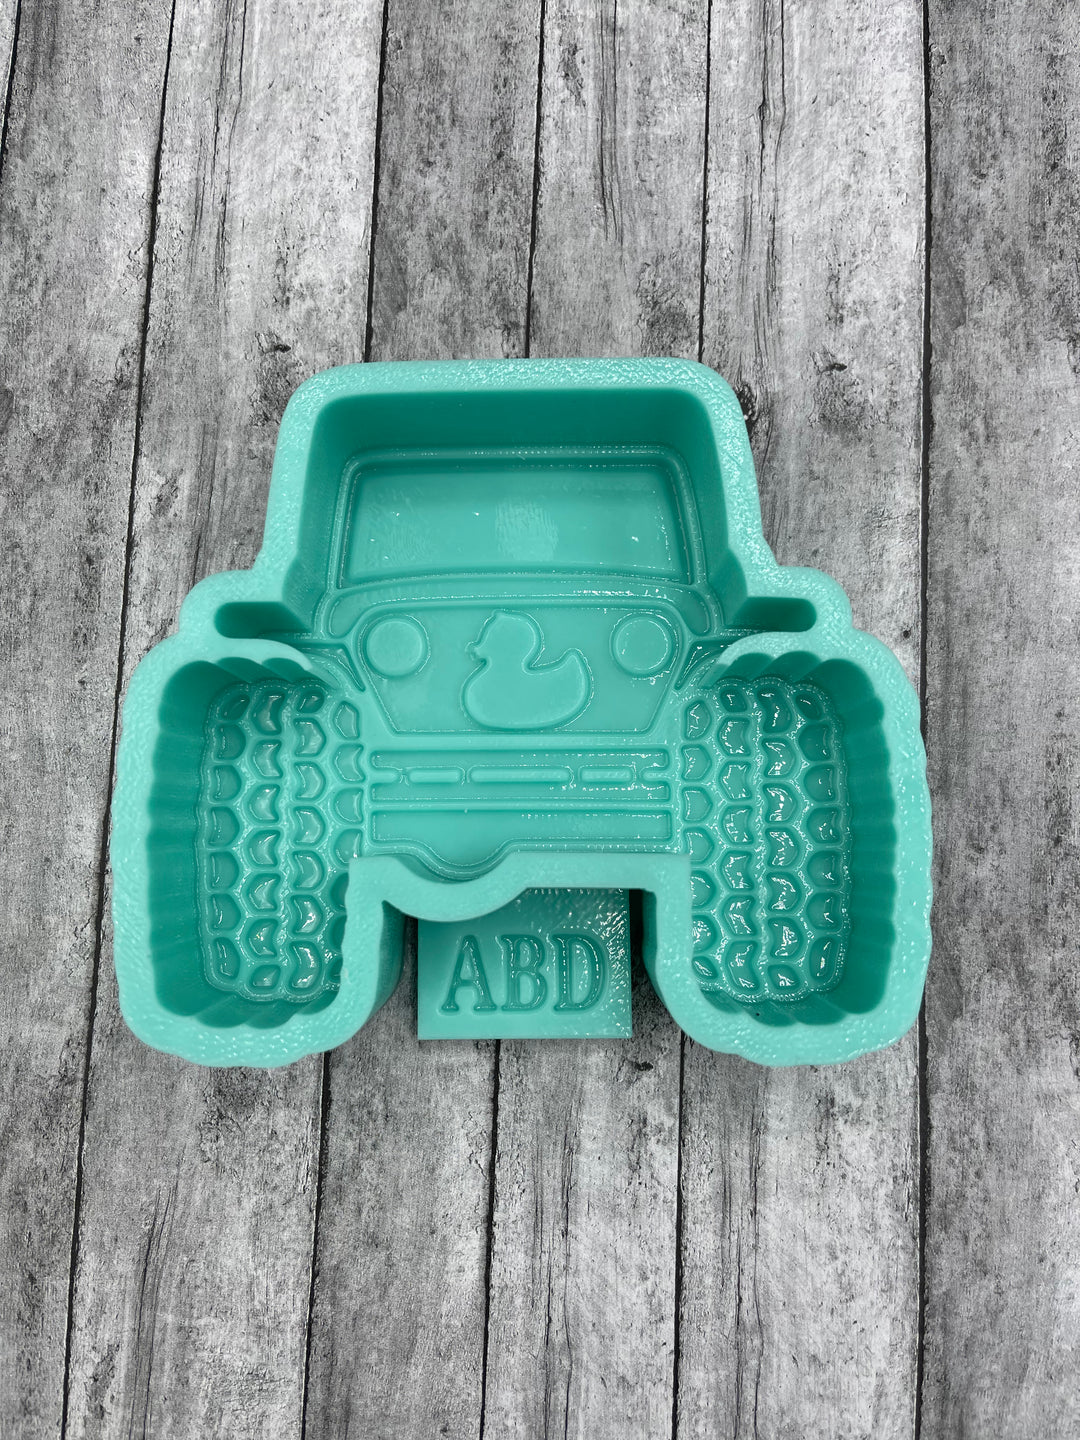 Off Road SUV with Duck Grill Freshie Mold